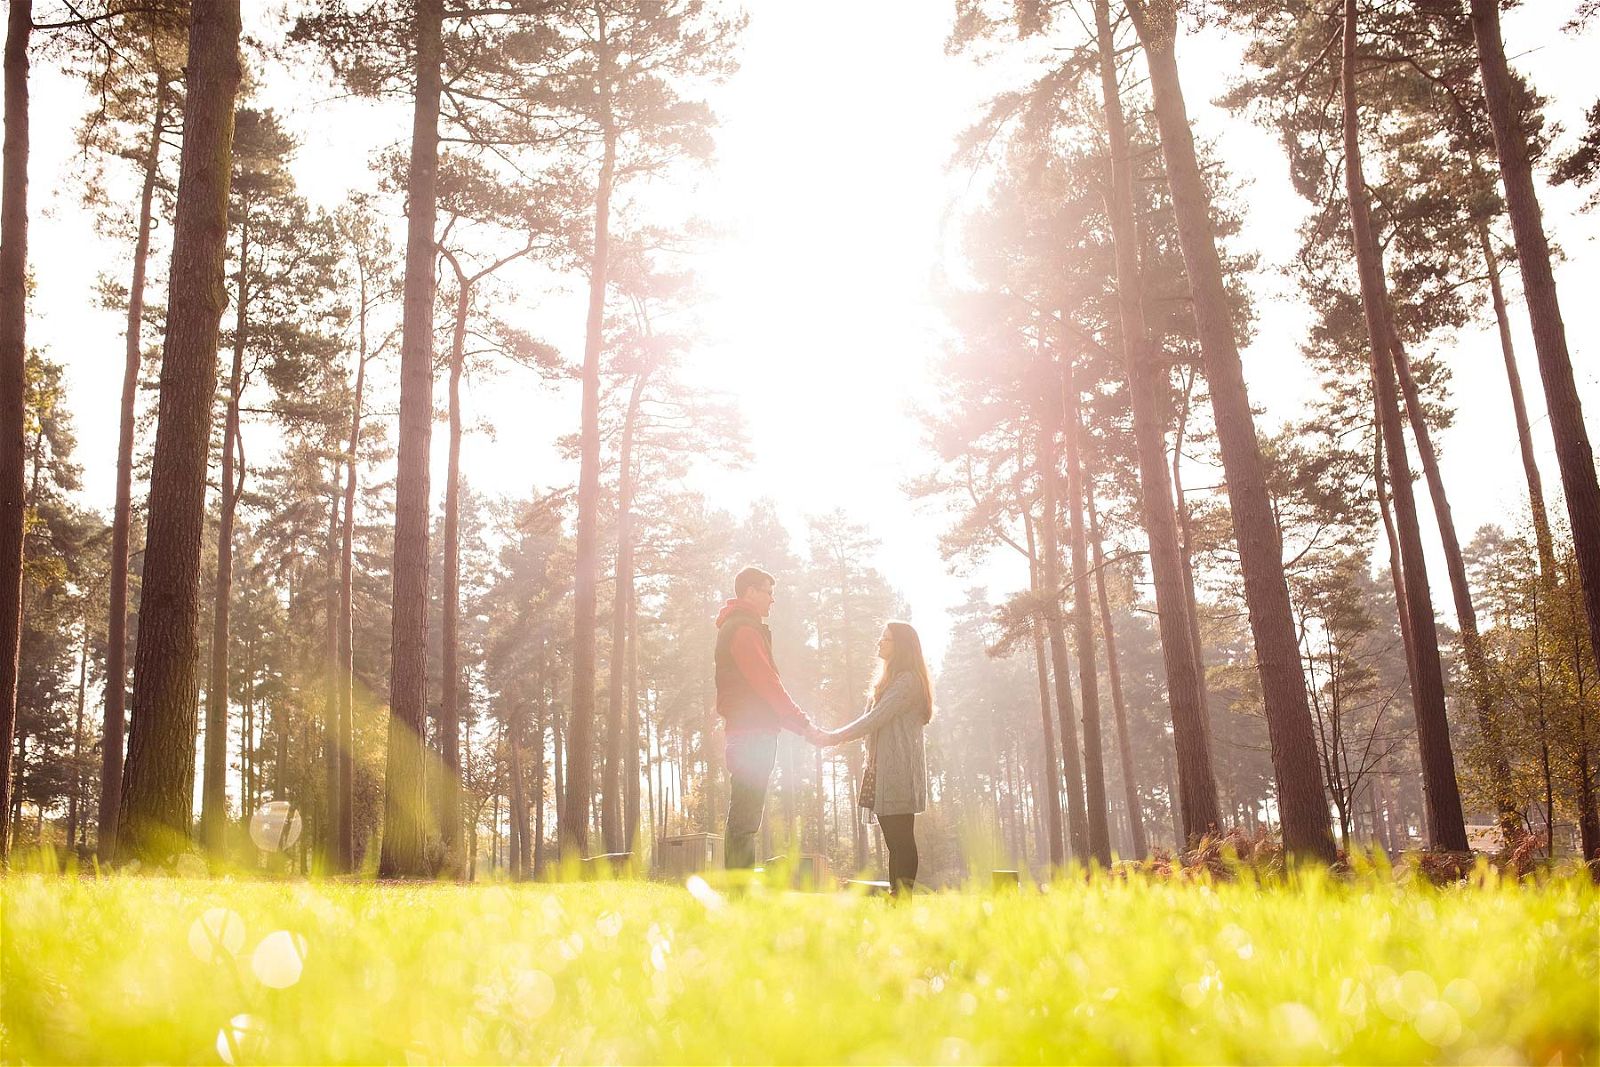 Stunning light and beautiful location proved to be the perfect setting for this couples engagement portrait session at Birches Valley in Cannock by Cannock Reportage Wedding Photographer Stuart James